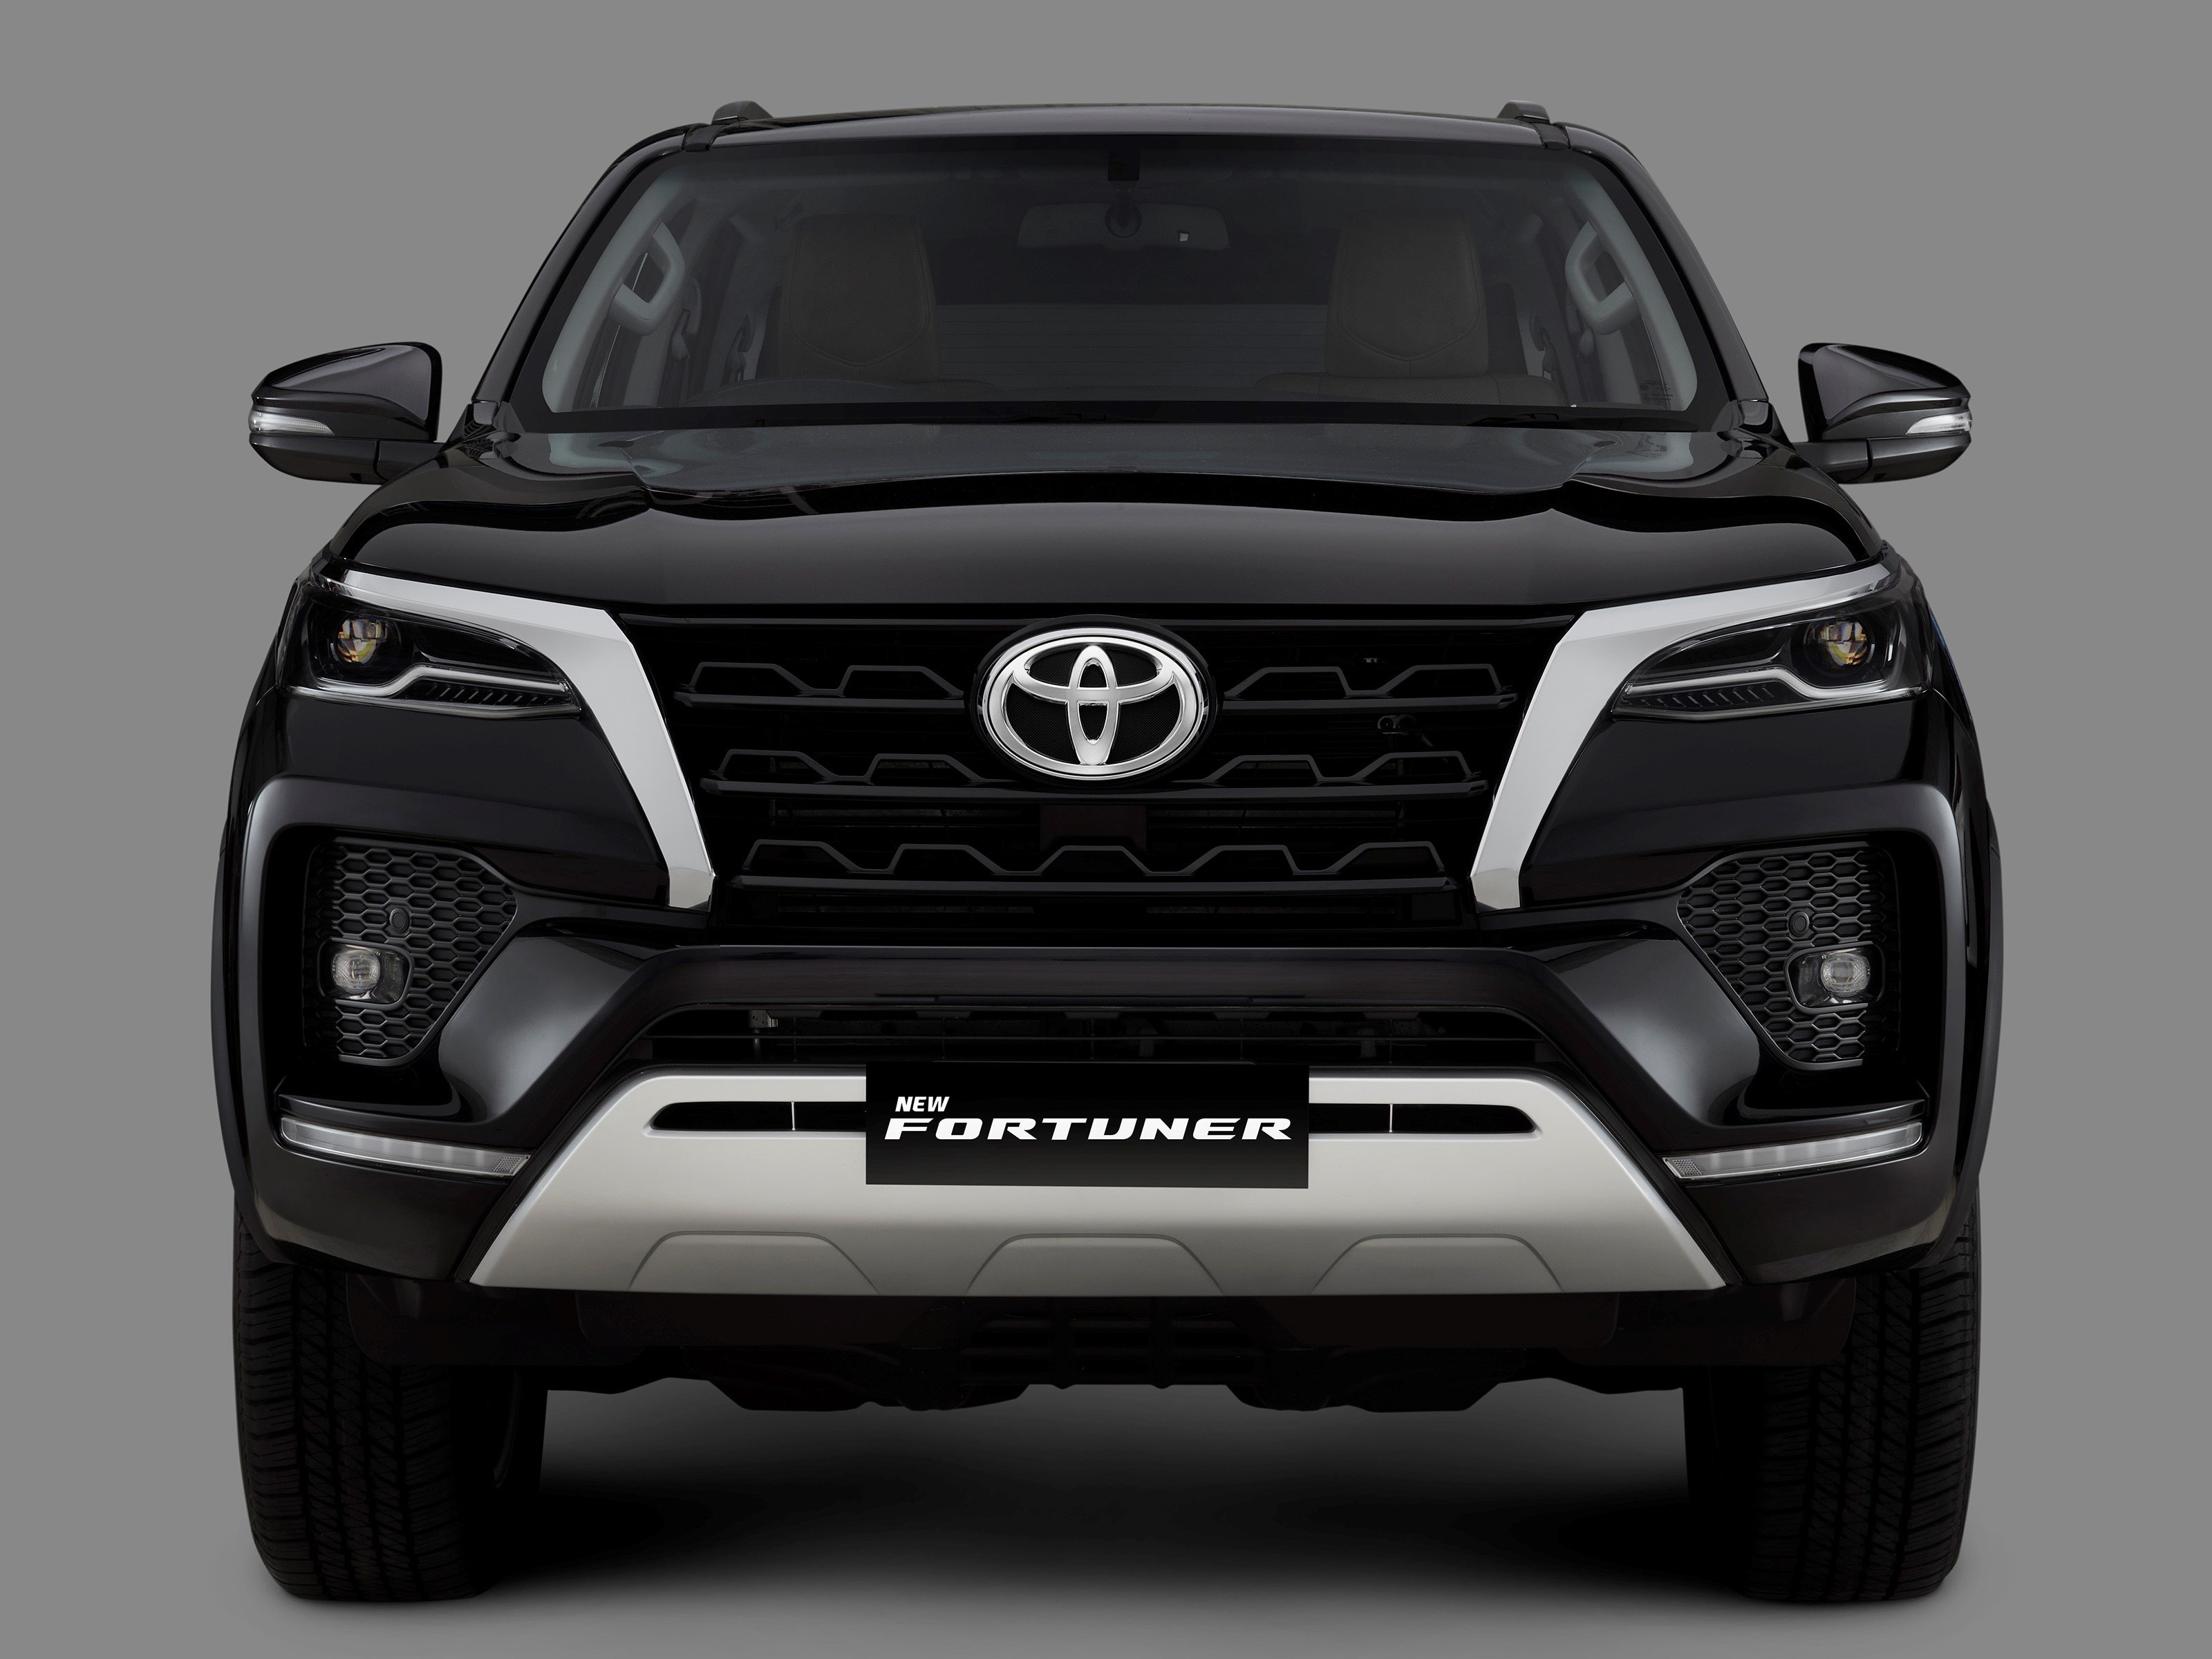 Toyota Fortuner's First Batch Of Deliveries Underway In Select Cities